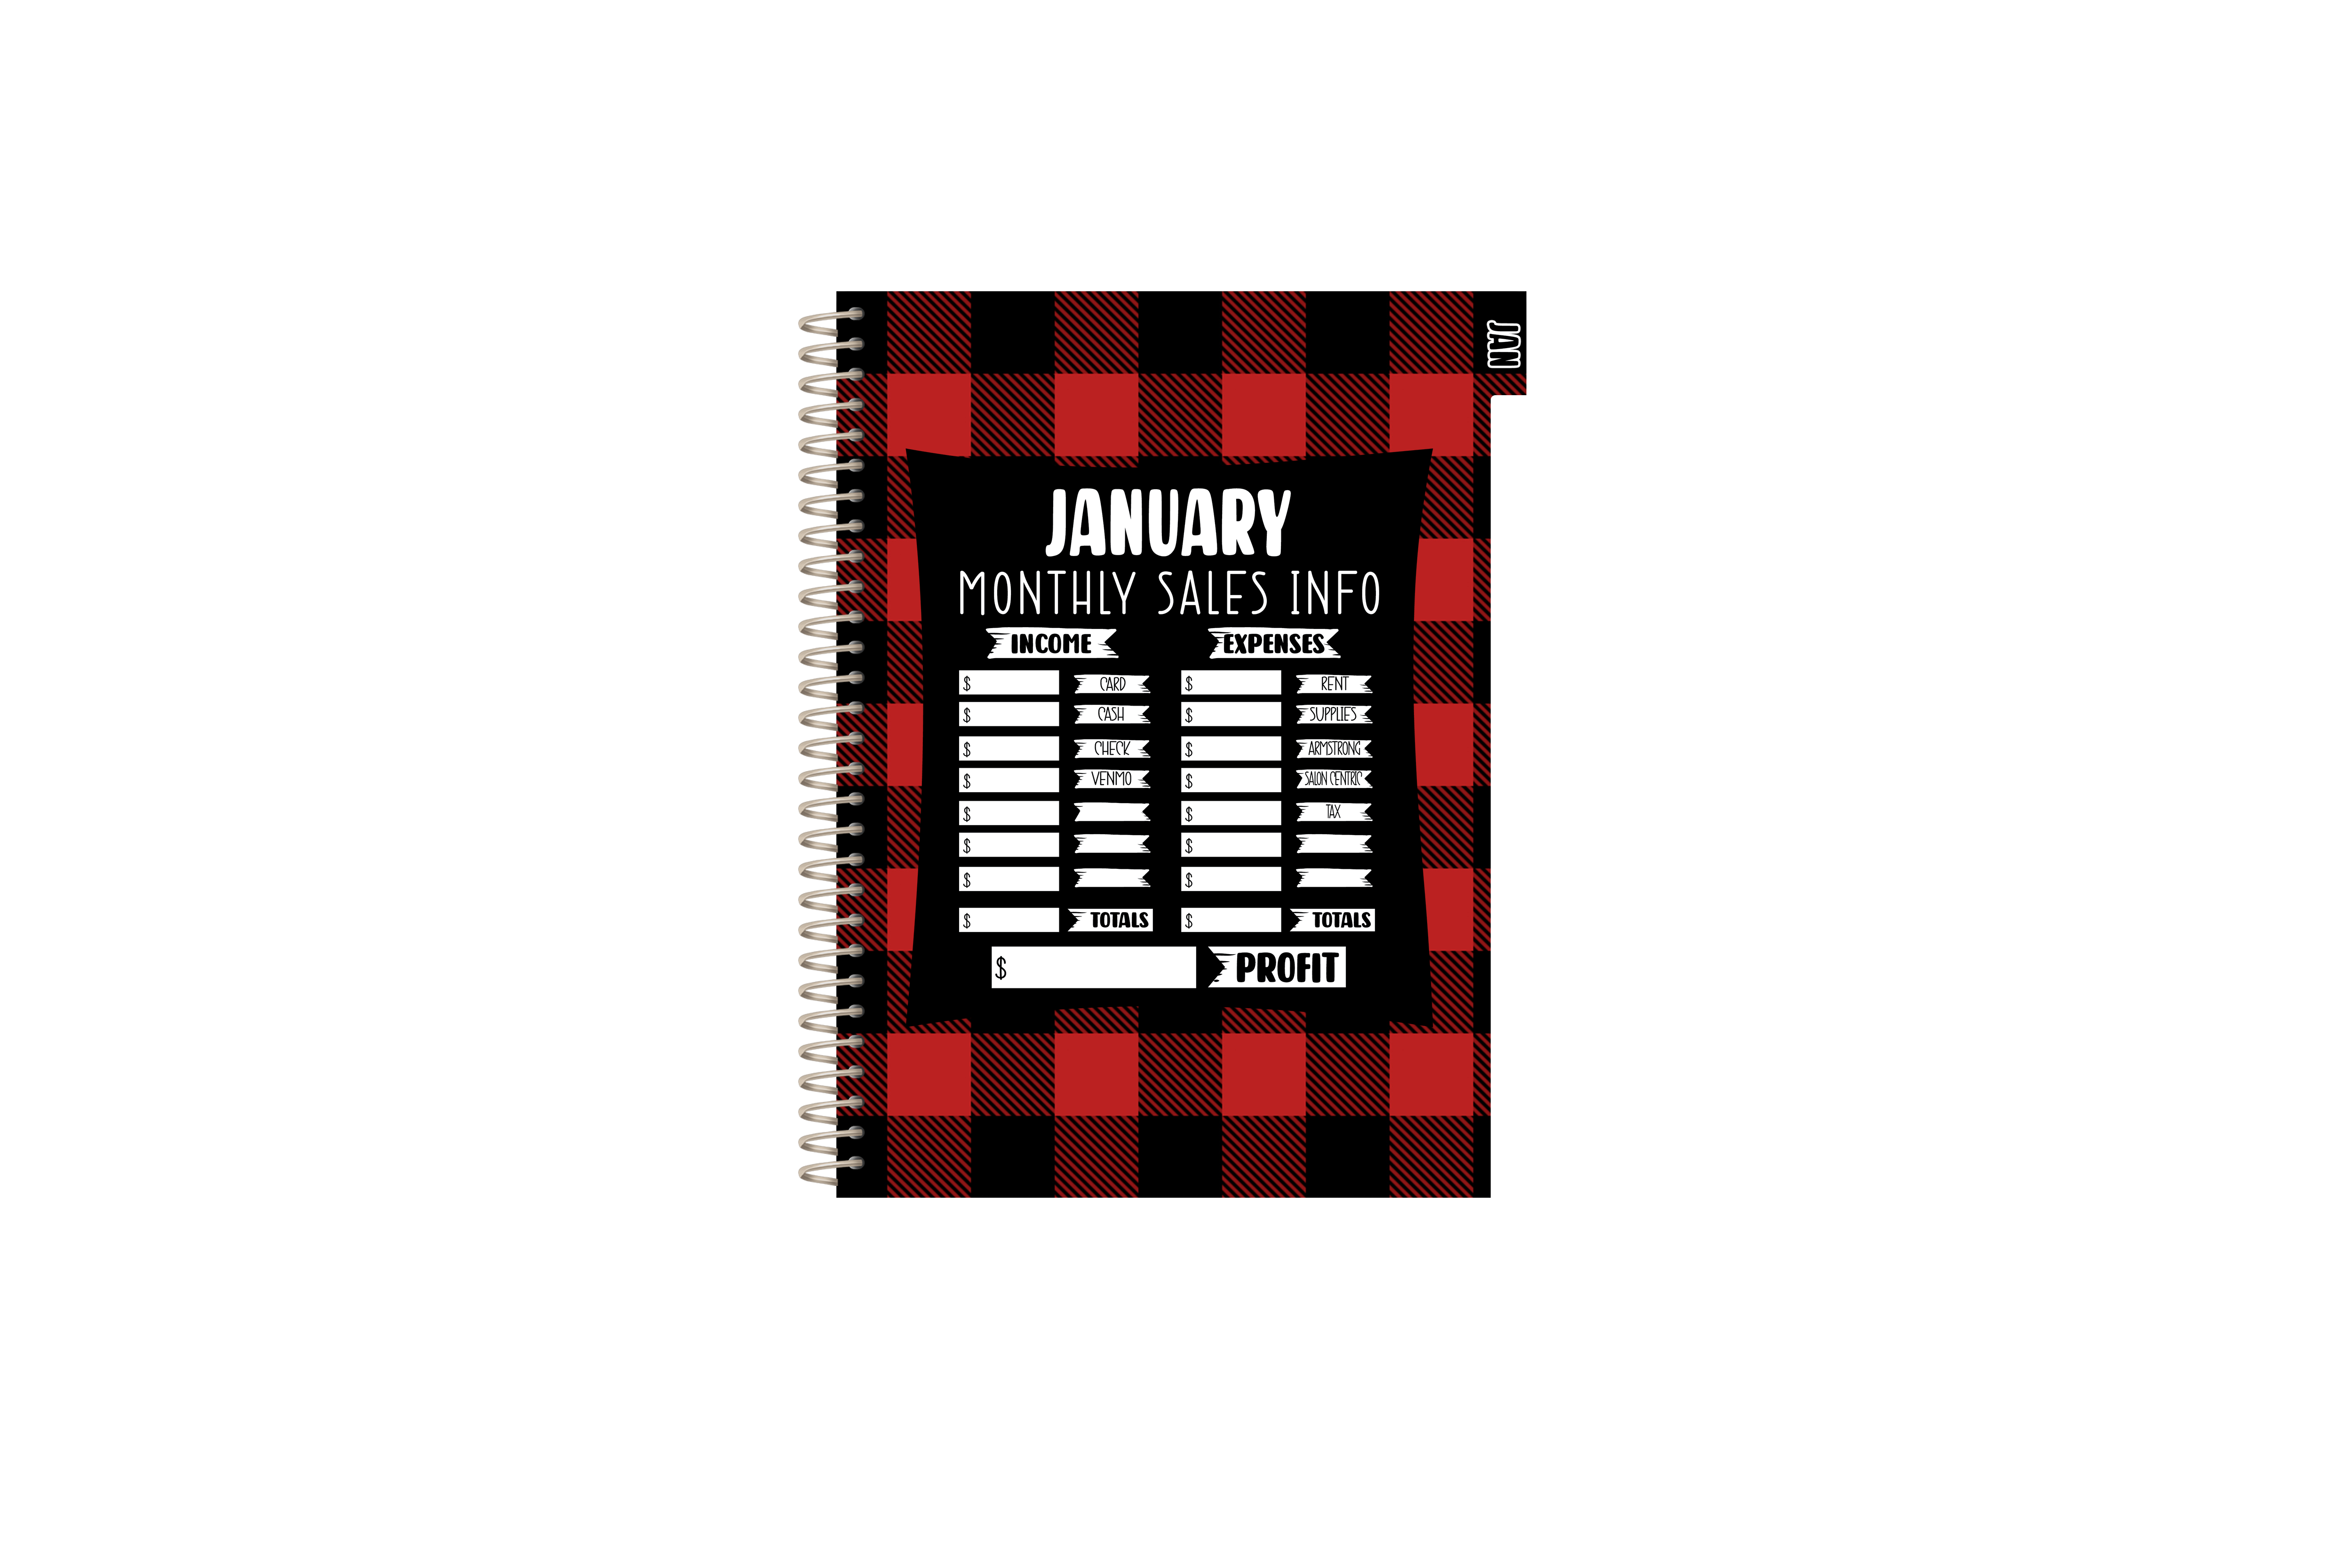 The Chelsea Appointment Book - BW BUFFALO PLAID